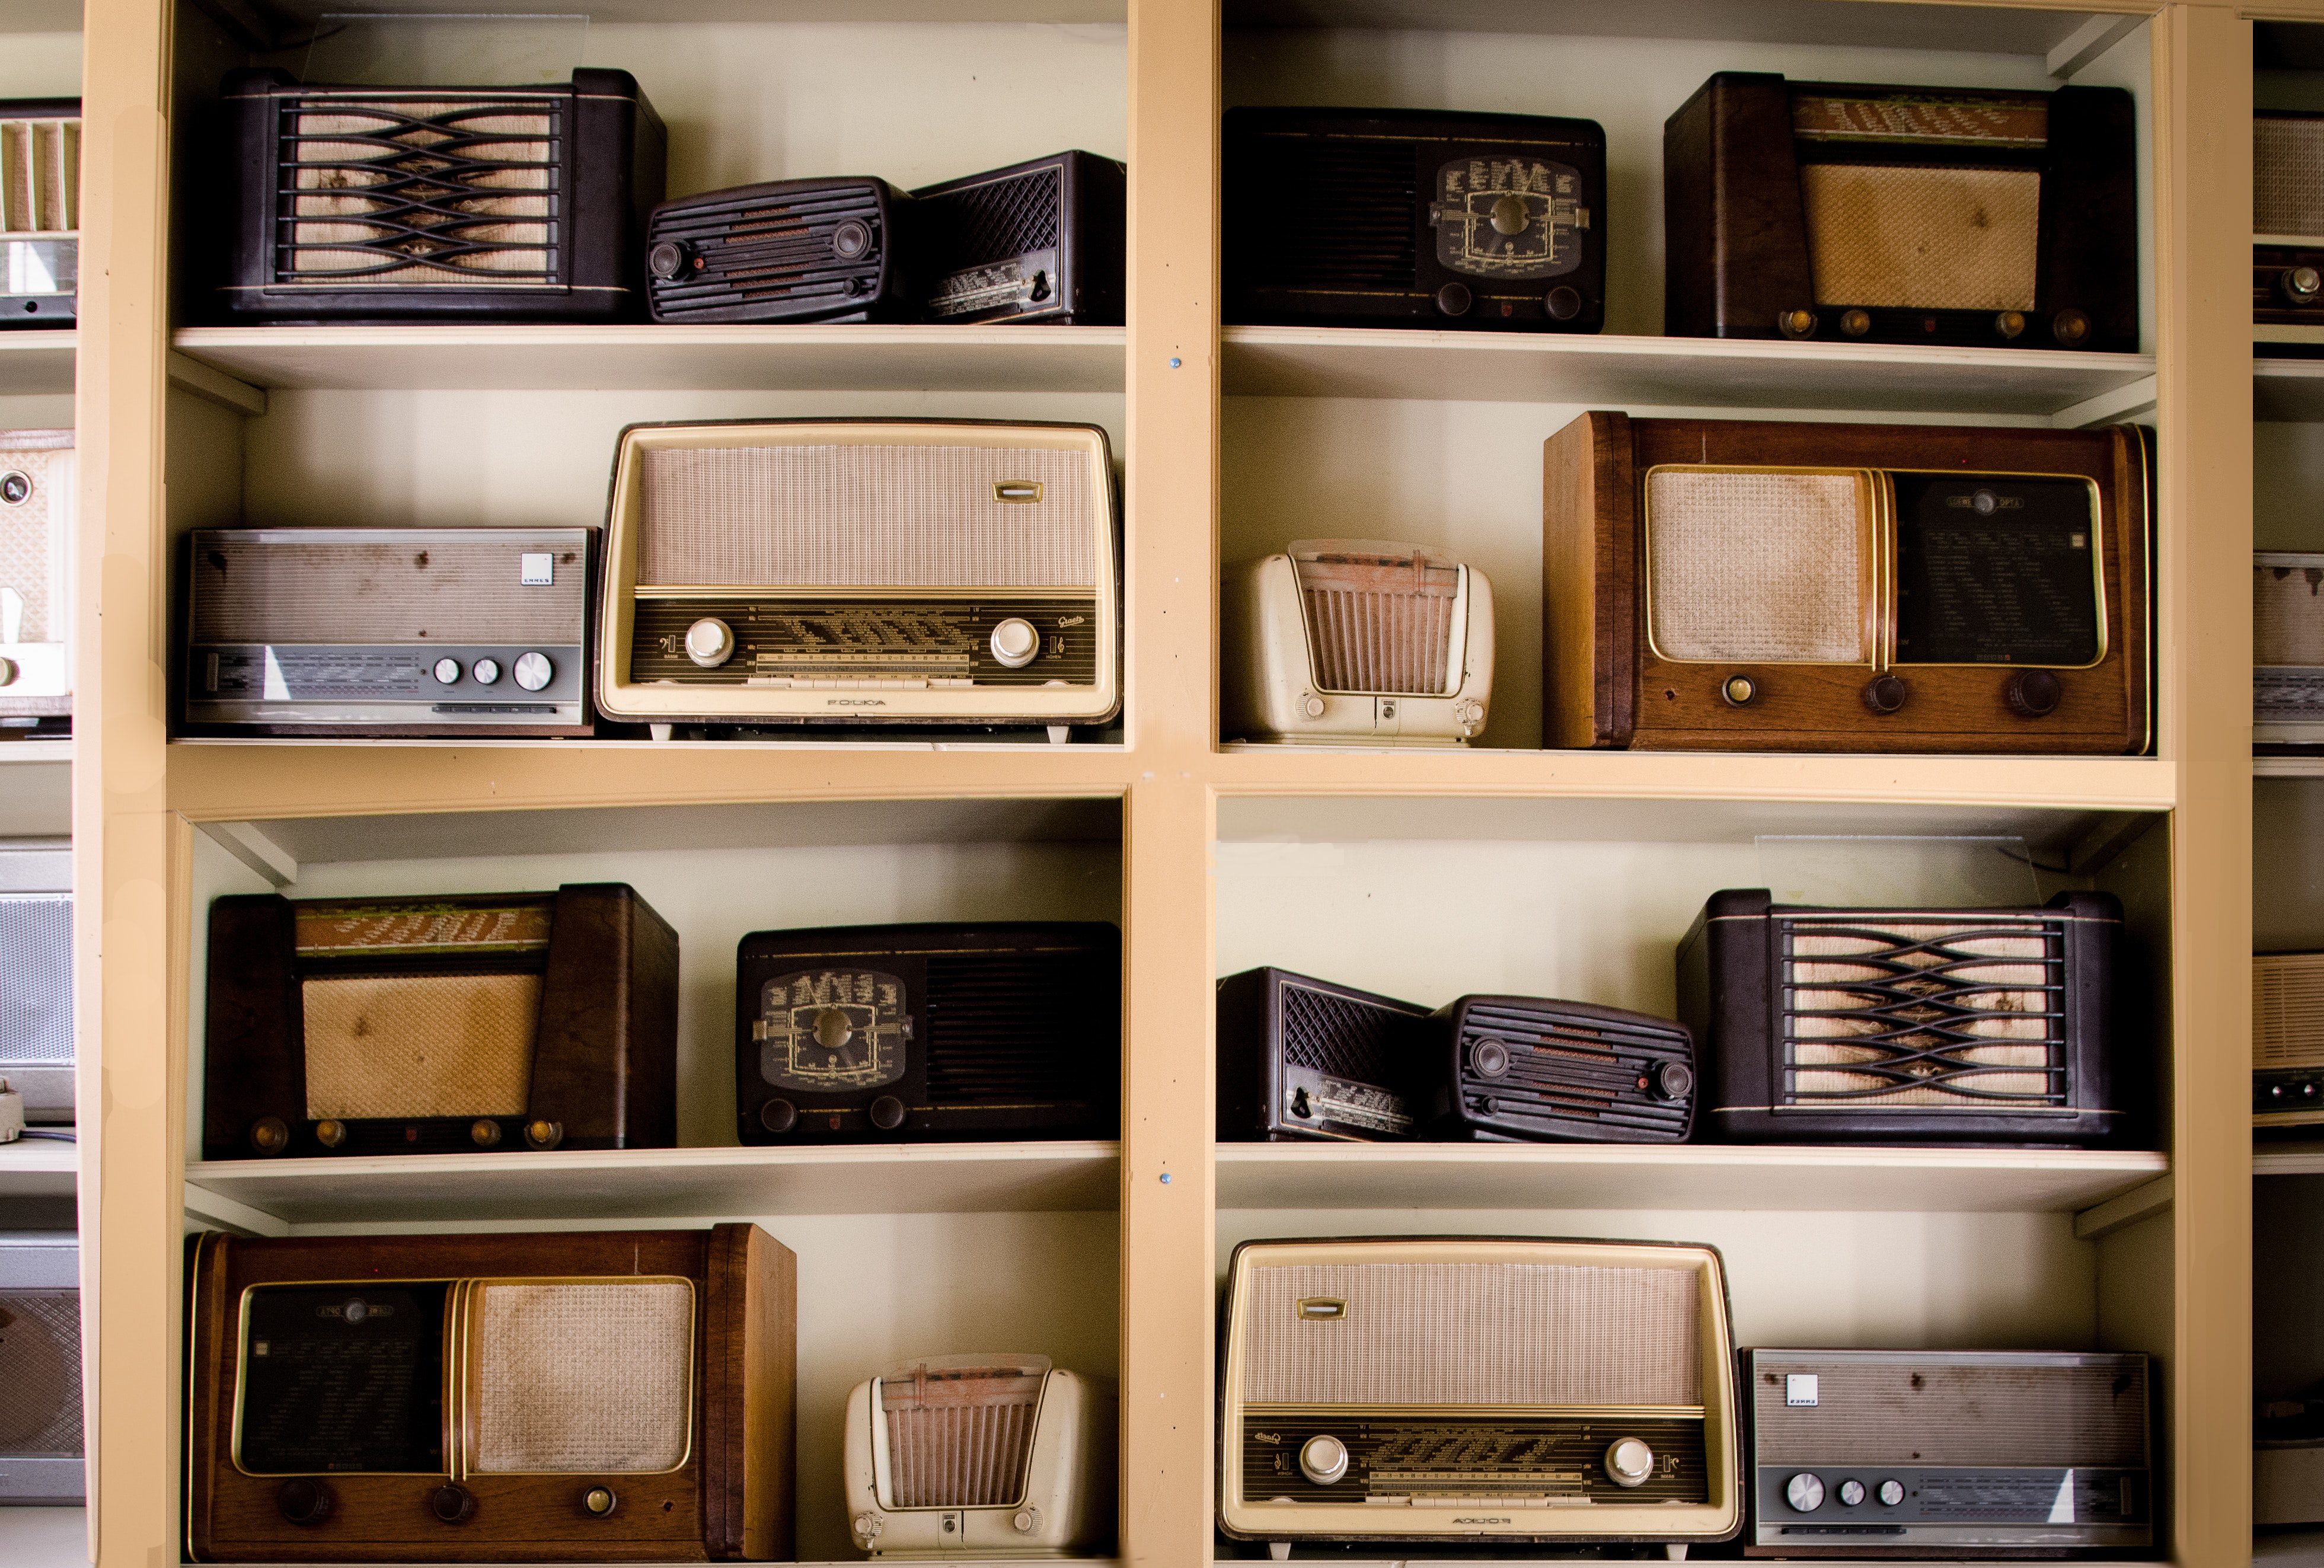 Floor to ceiling light brown book shelf fulled with brown and cream coloured vintage radios